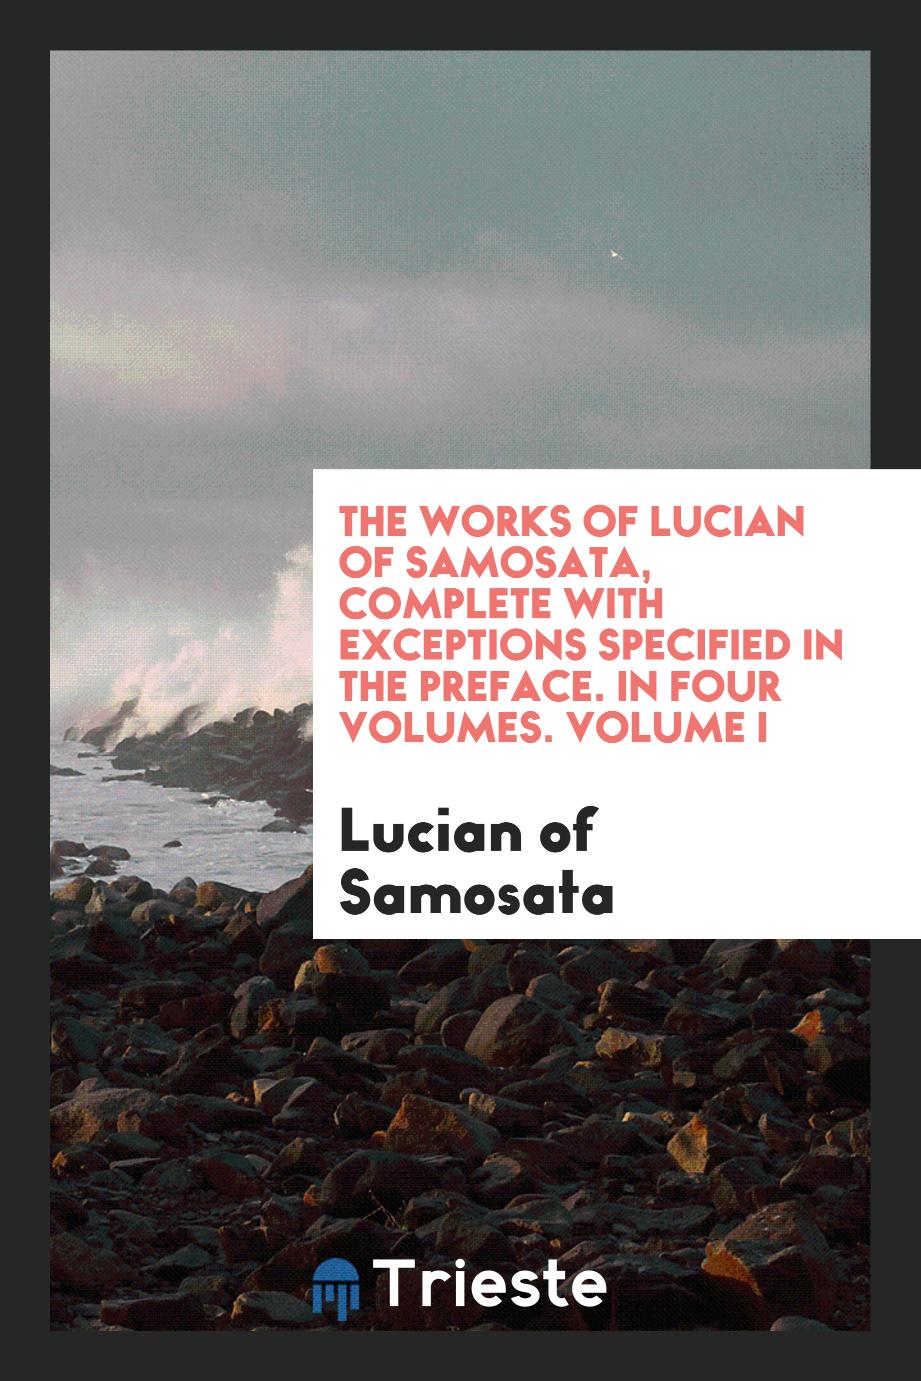 The works of Lucian of Samosata, complete with exceptions specified in the preface. In four volumes. Volume I